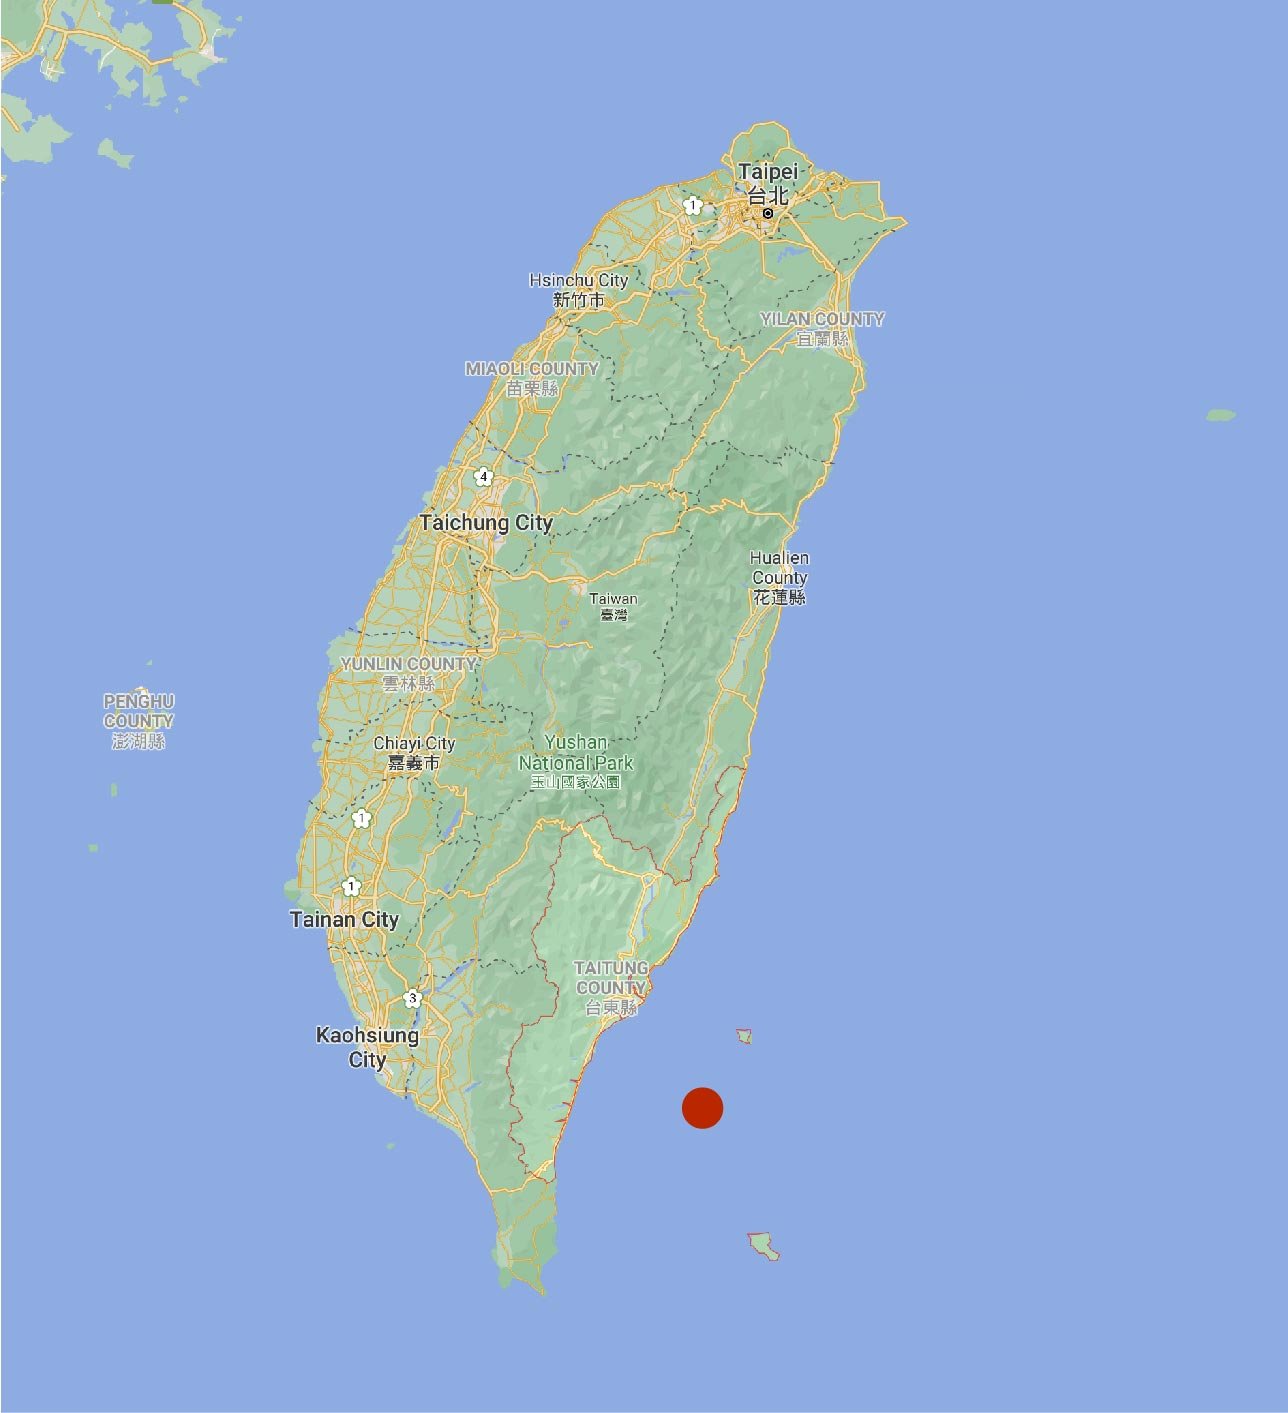 An earthquake with a magnitude of 4.6 occurred in Taitung County, Taiwan with a focal depth of 44 kilometers